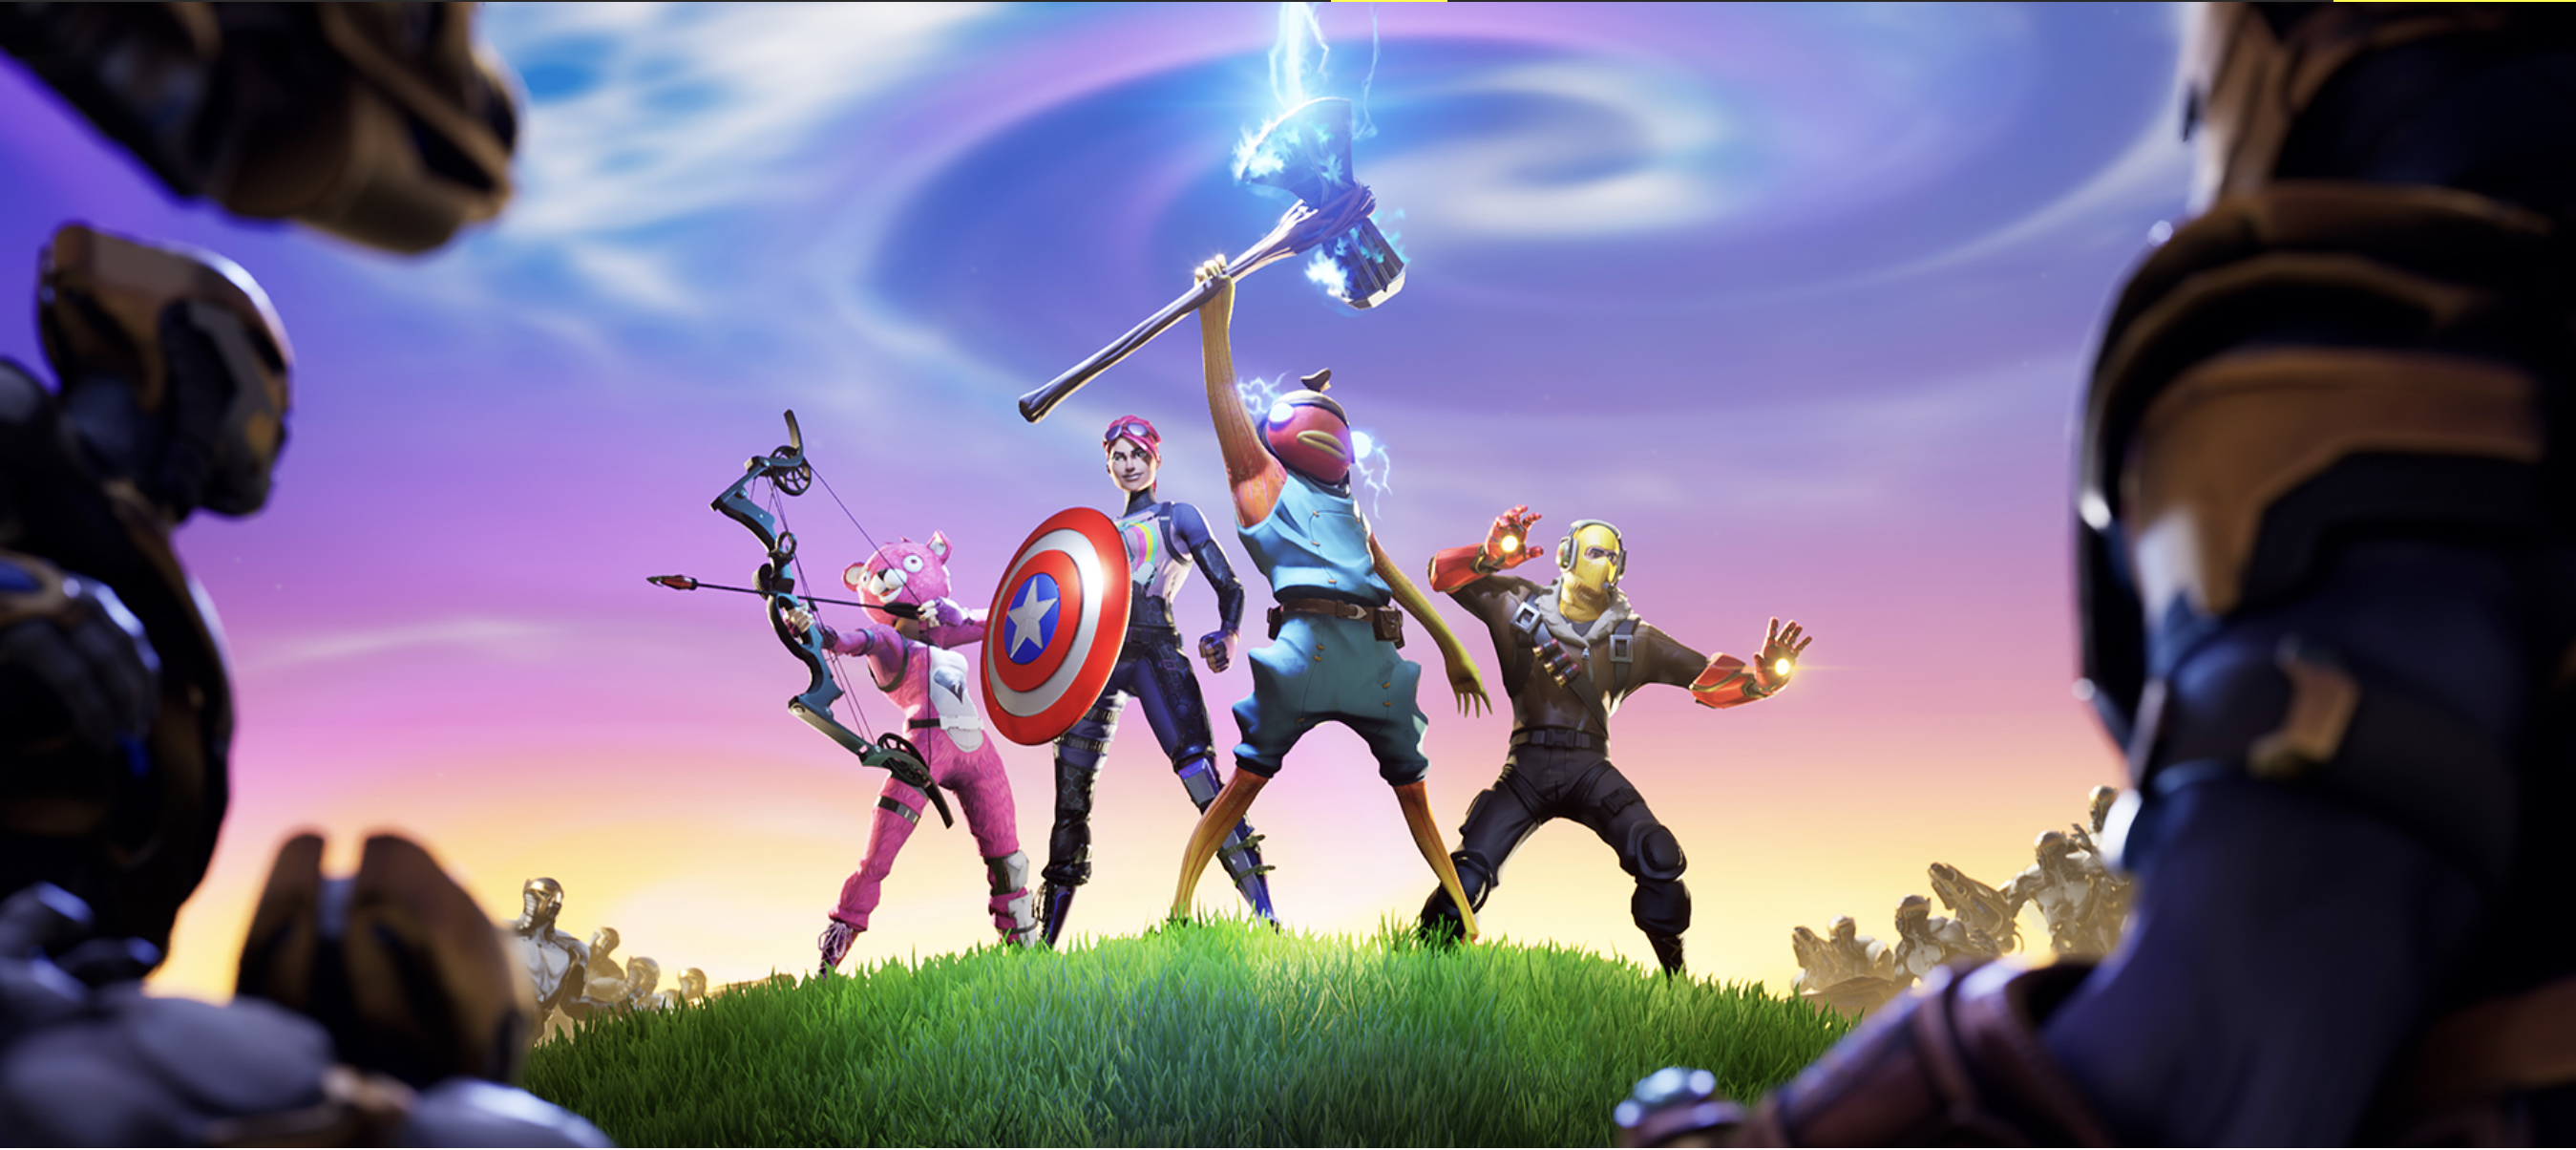 Fortnite Adds Star Lord and Guardians of the Galaxy Set for 'Endgame